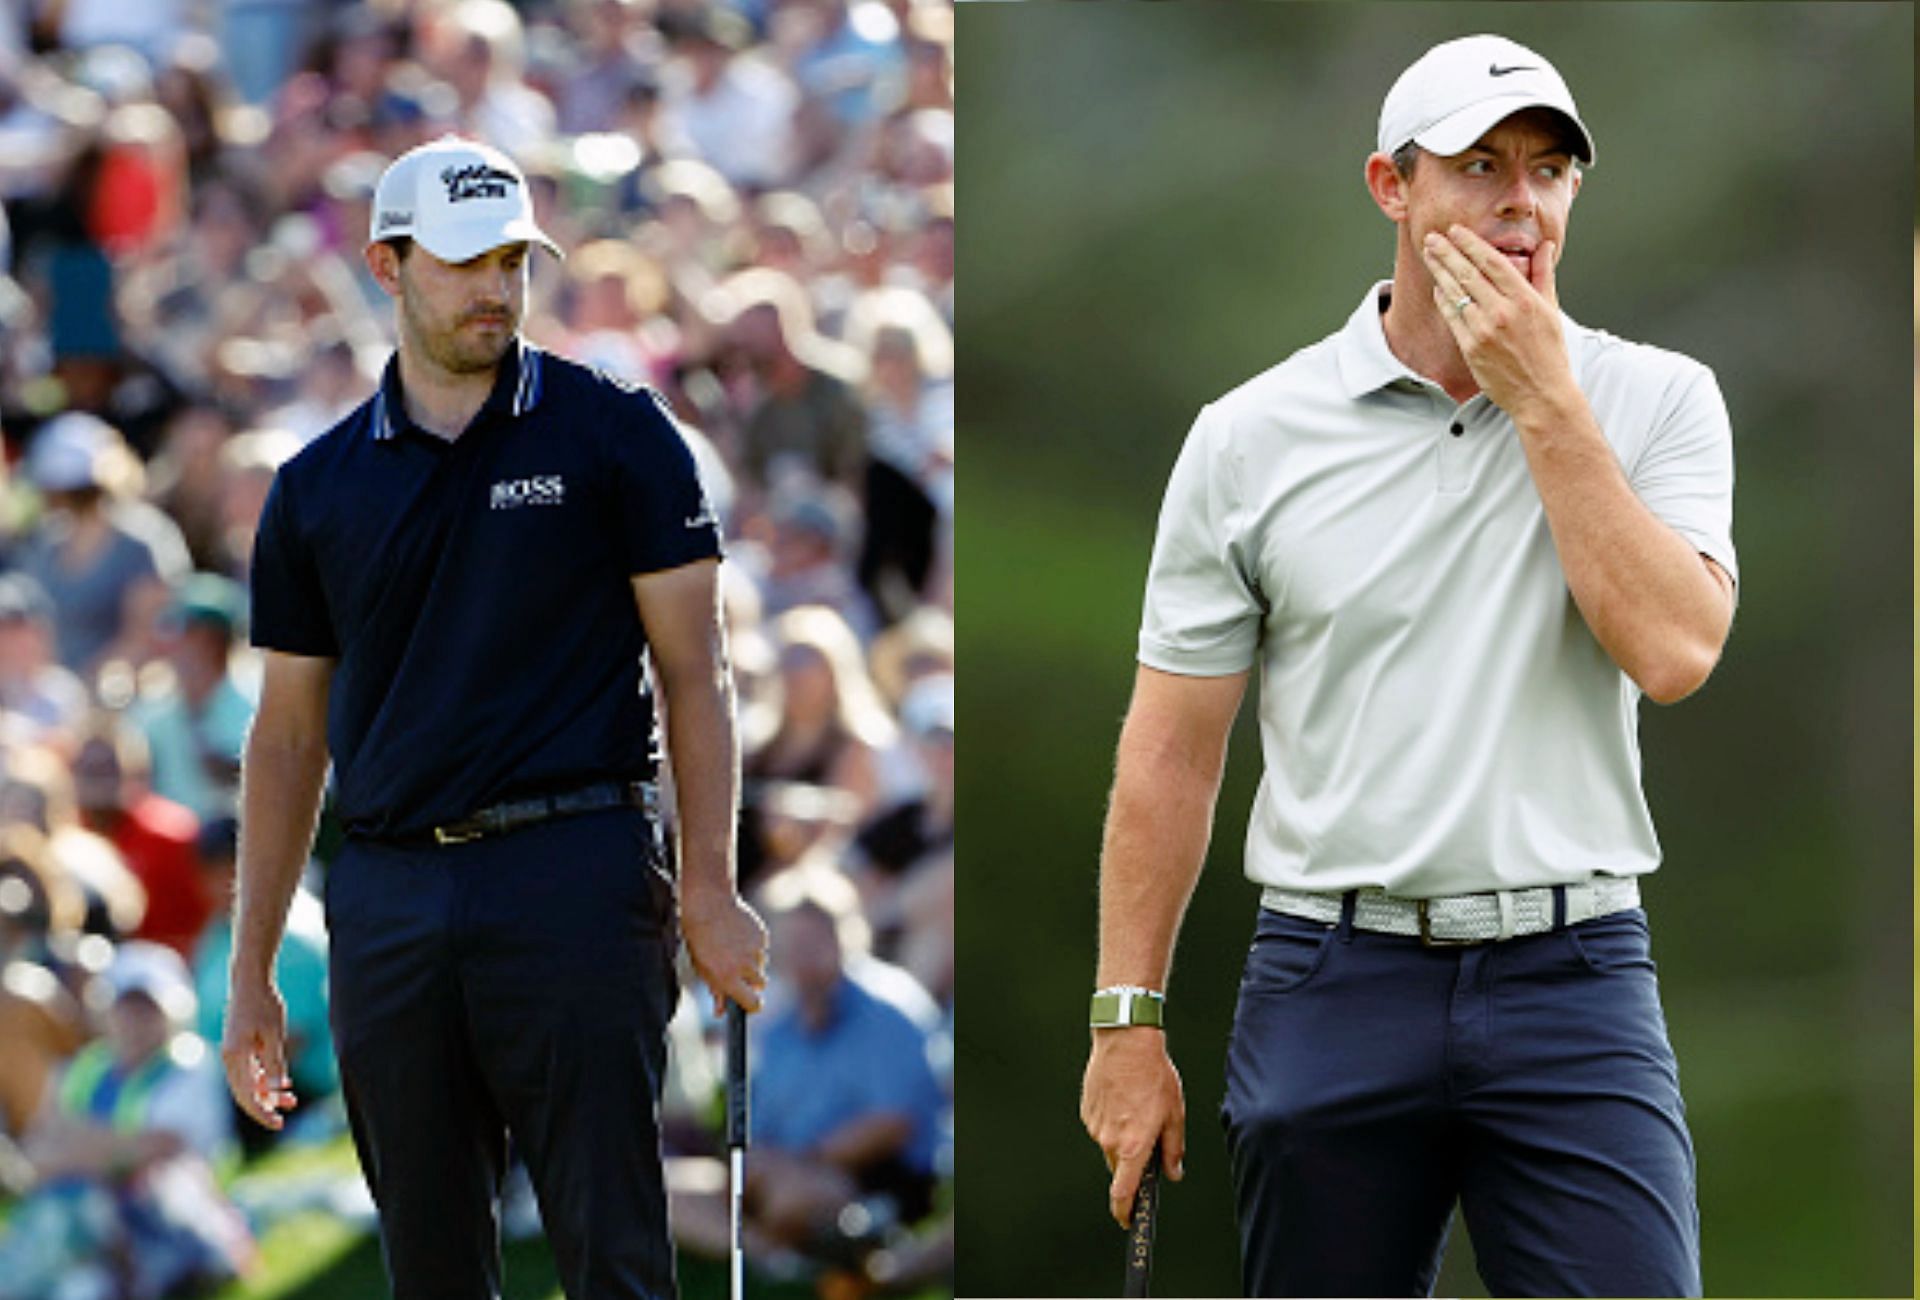 Patrick Cantlay and Rory McIlroy (Image via Getty).